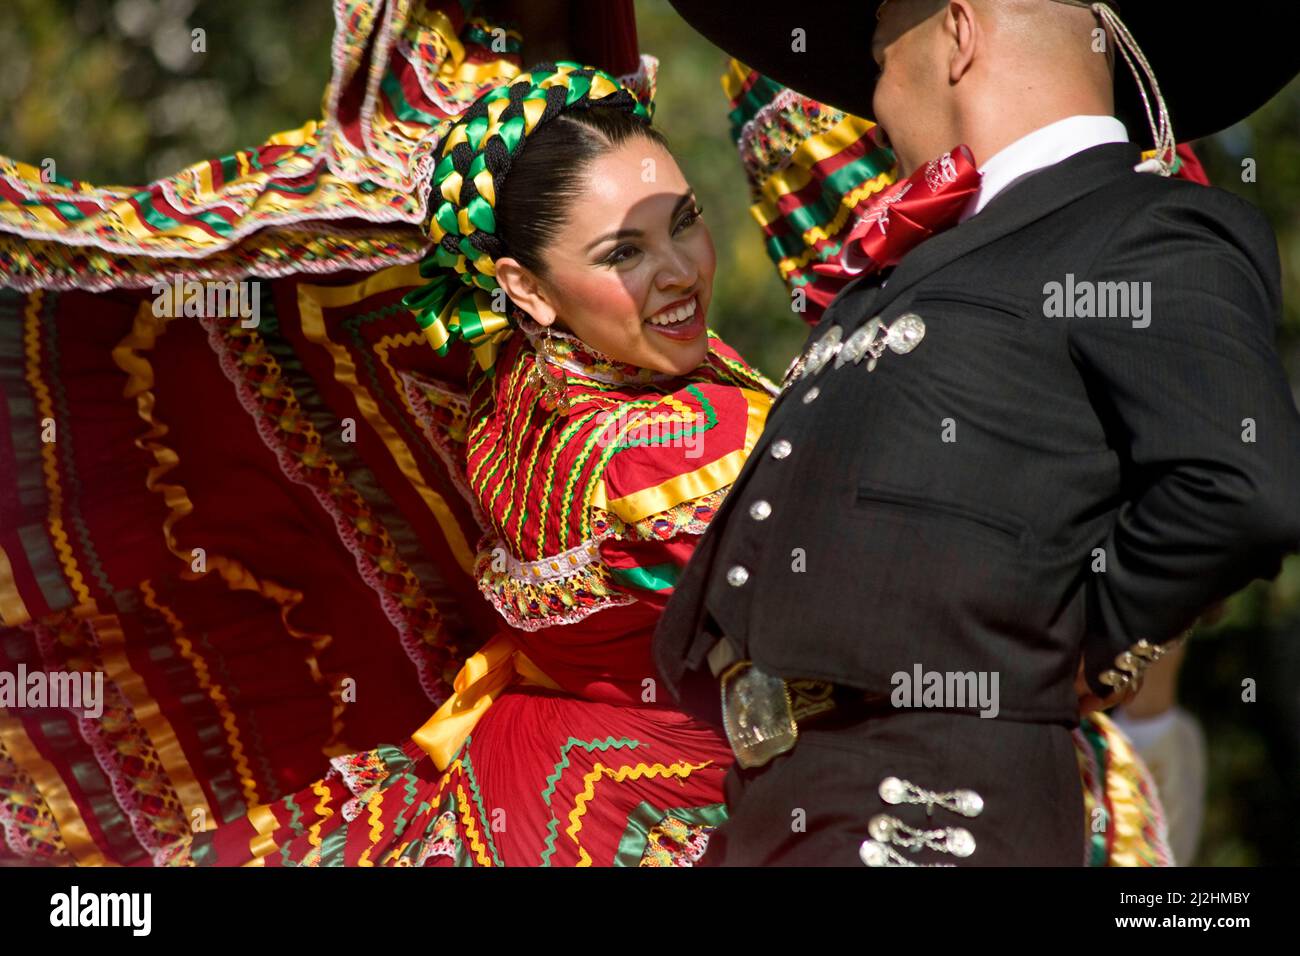 Mexican folkloric dancers at Mexican Independence Day, Los Angeles ...